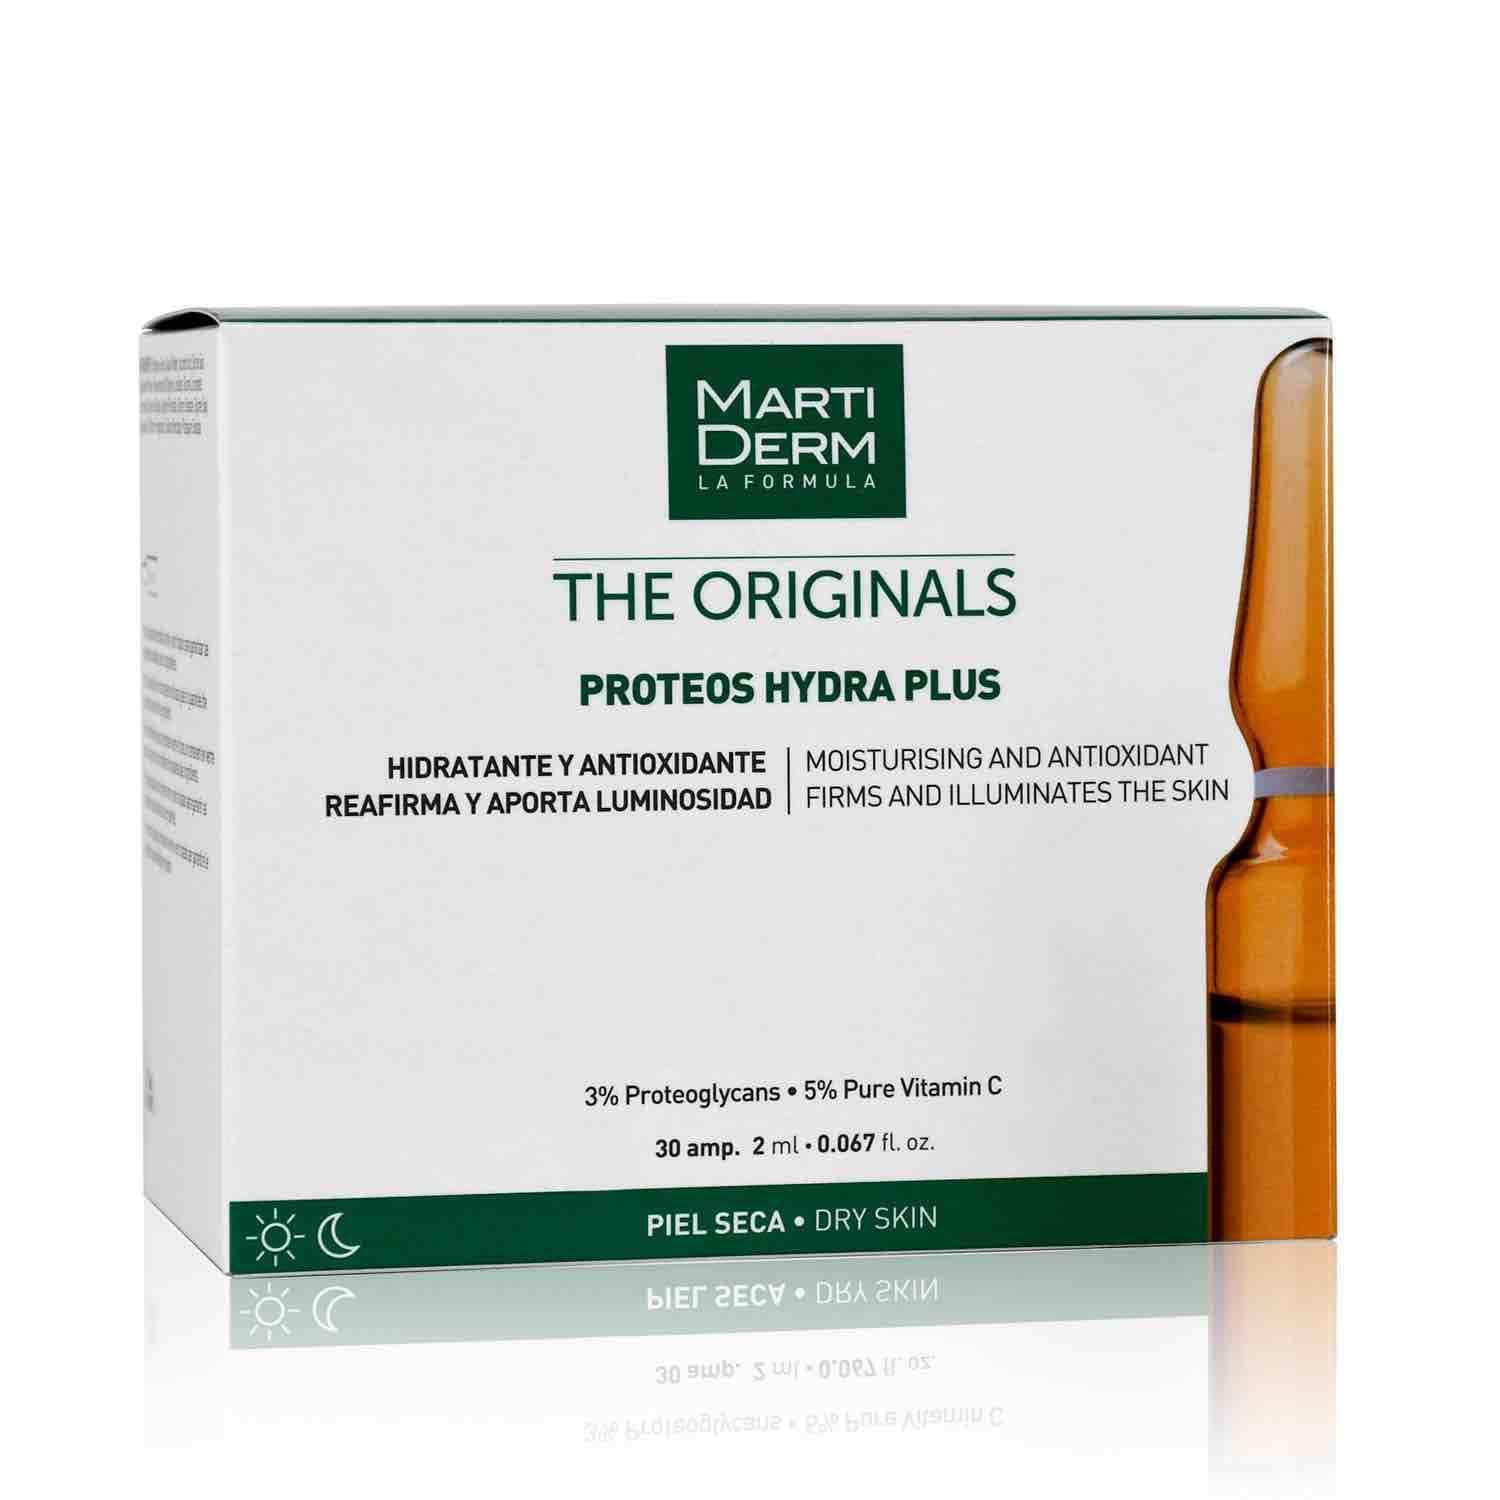 Shop Proteos Hydra Plus 30 Ampoules from Martiderm on SublimeLife.in. Best for correcting wrinkles and moisturising the skin.